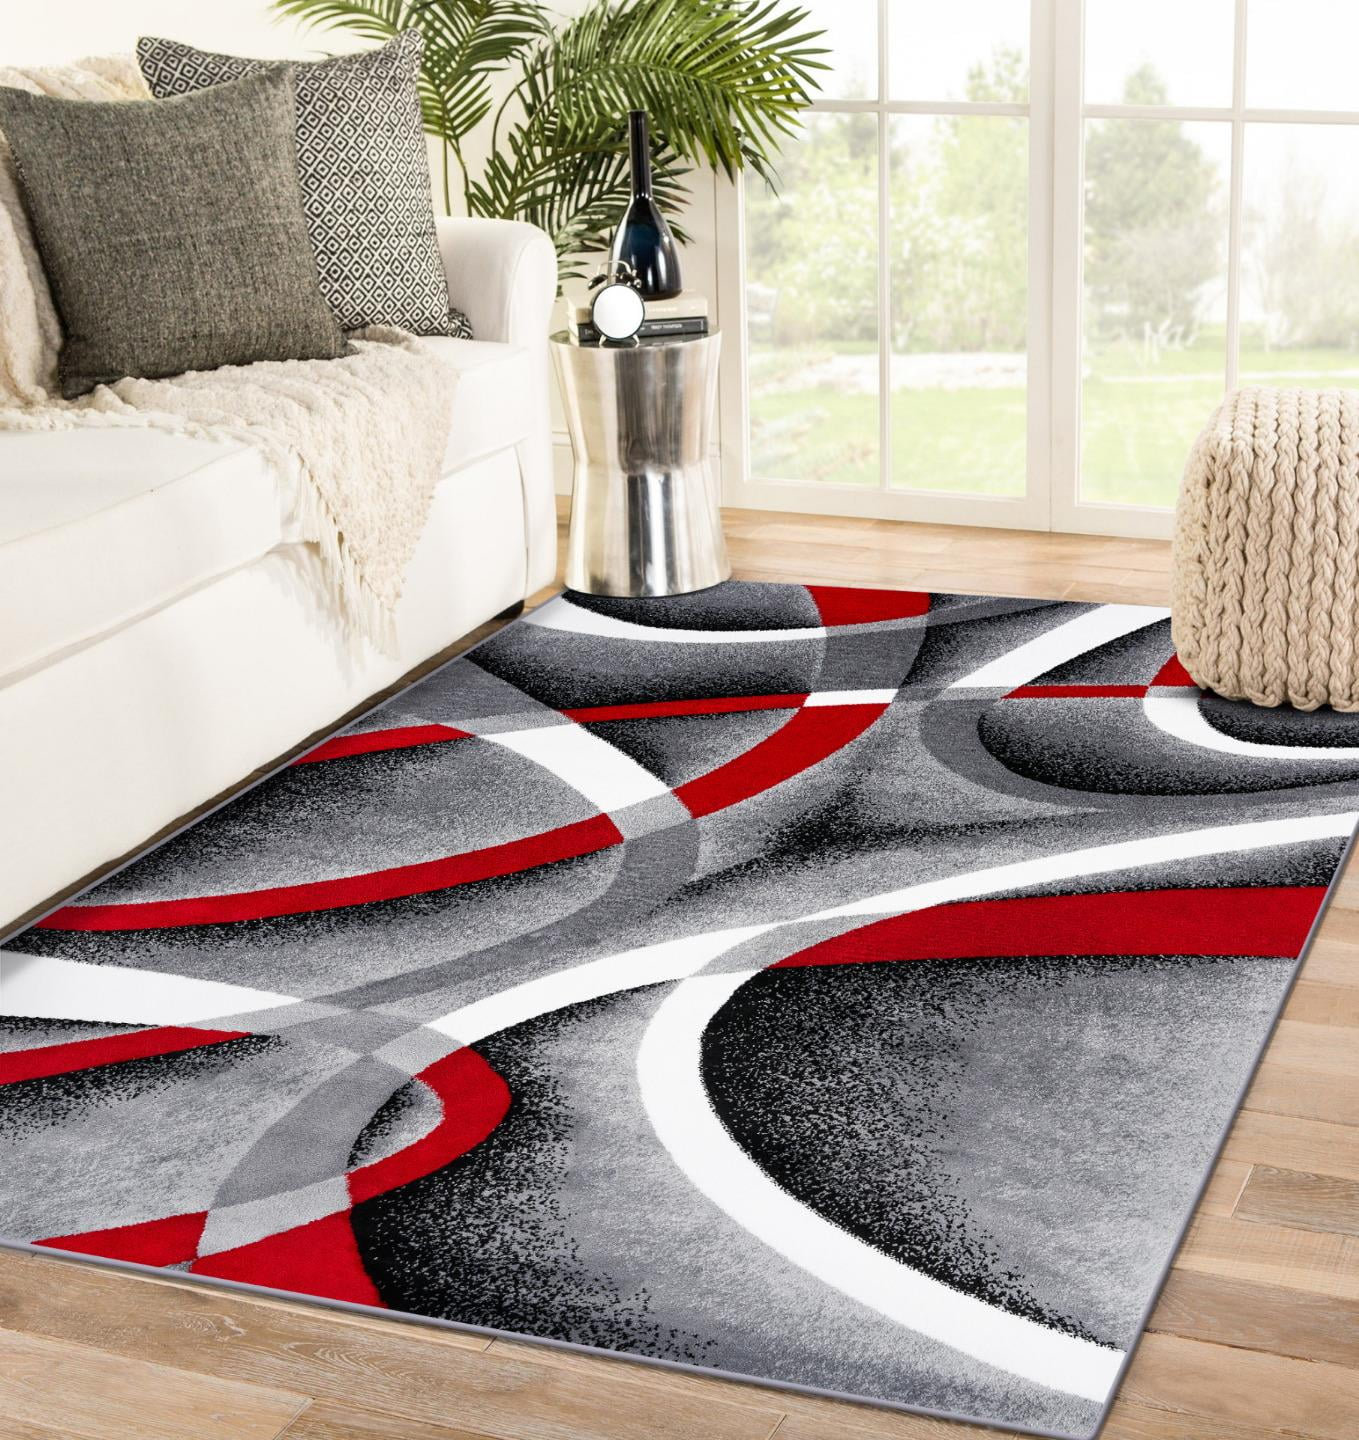 Luxe Weavers Gray Modern Abstract Area Rug 8x11 Geometric Living Room Carpet